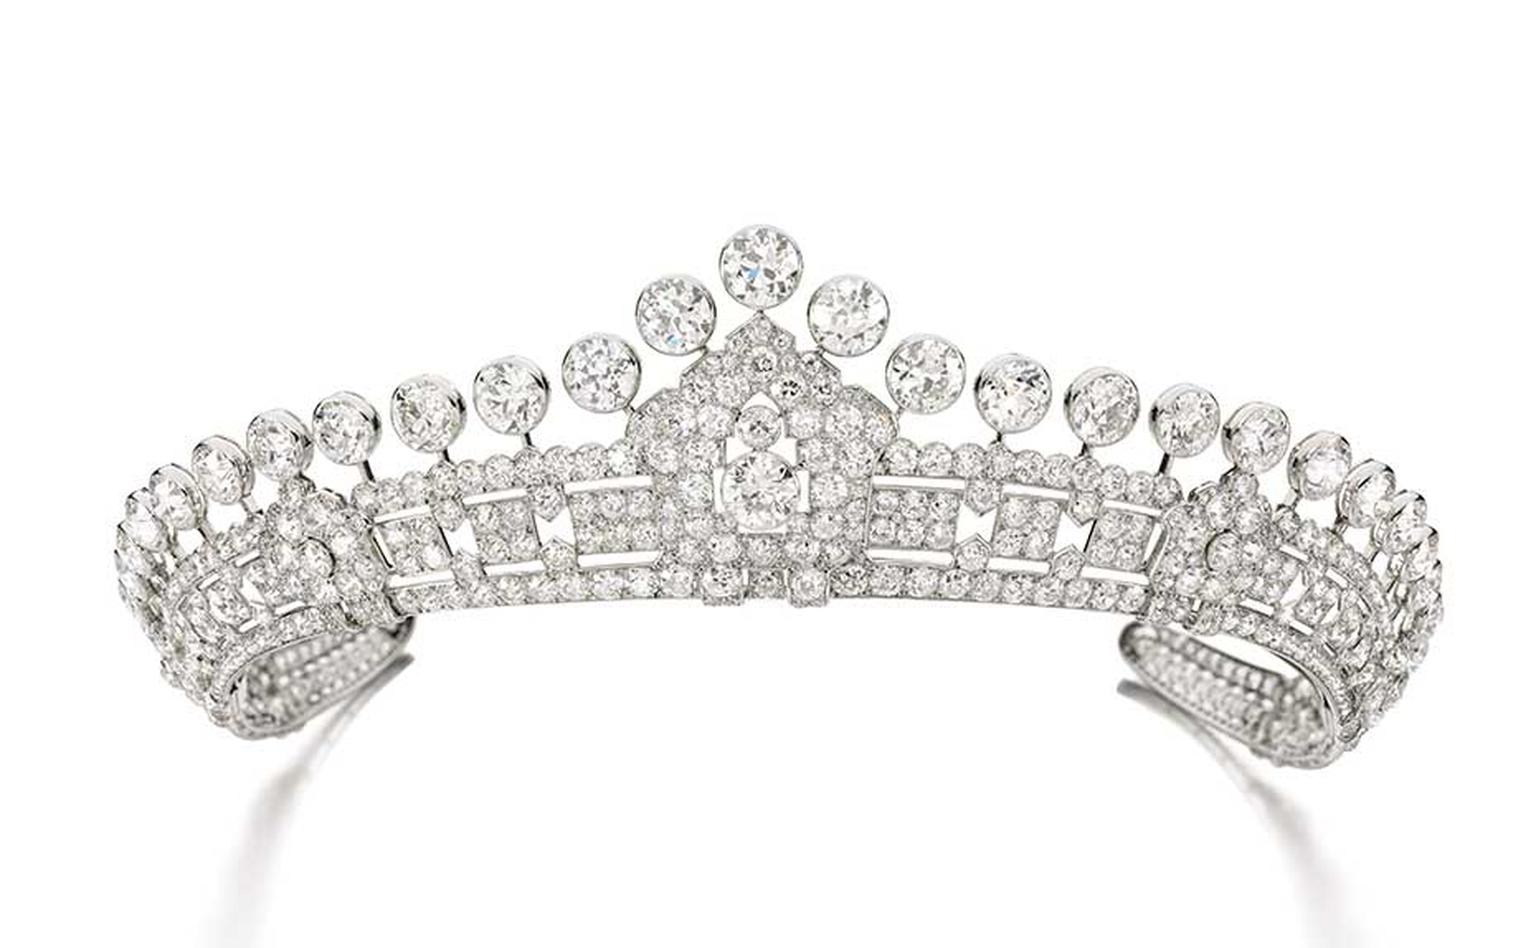 This Cartier tiara dating from the 1930s is one of three vintage tiaras from the estate of Mary, Duchess of Roxburghe, set to go under the hammer at next month’s Magnificent Jewels and Noble Jewels Sale at Sotheby’s Geneva (estimate: $306-505,000).